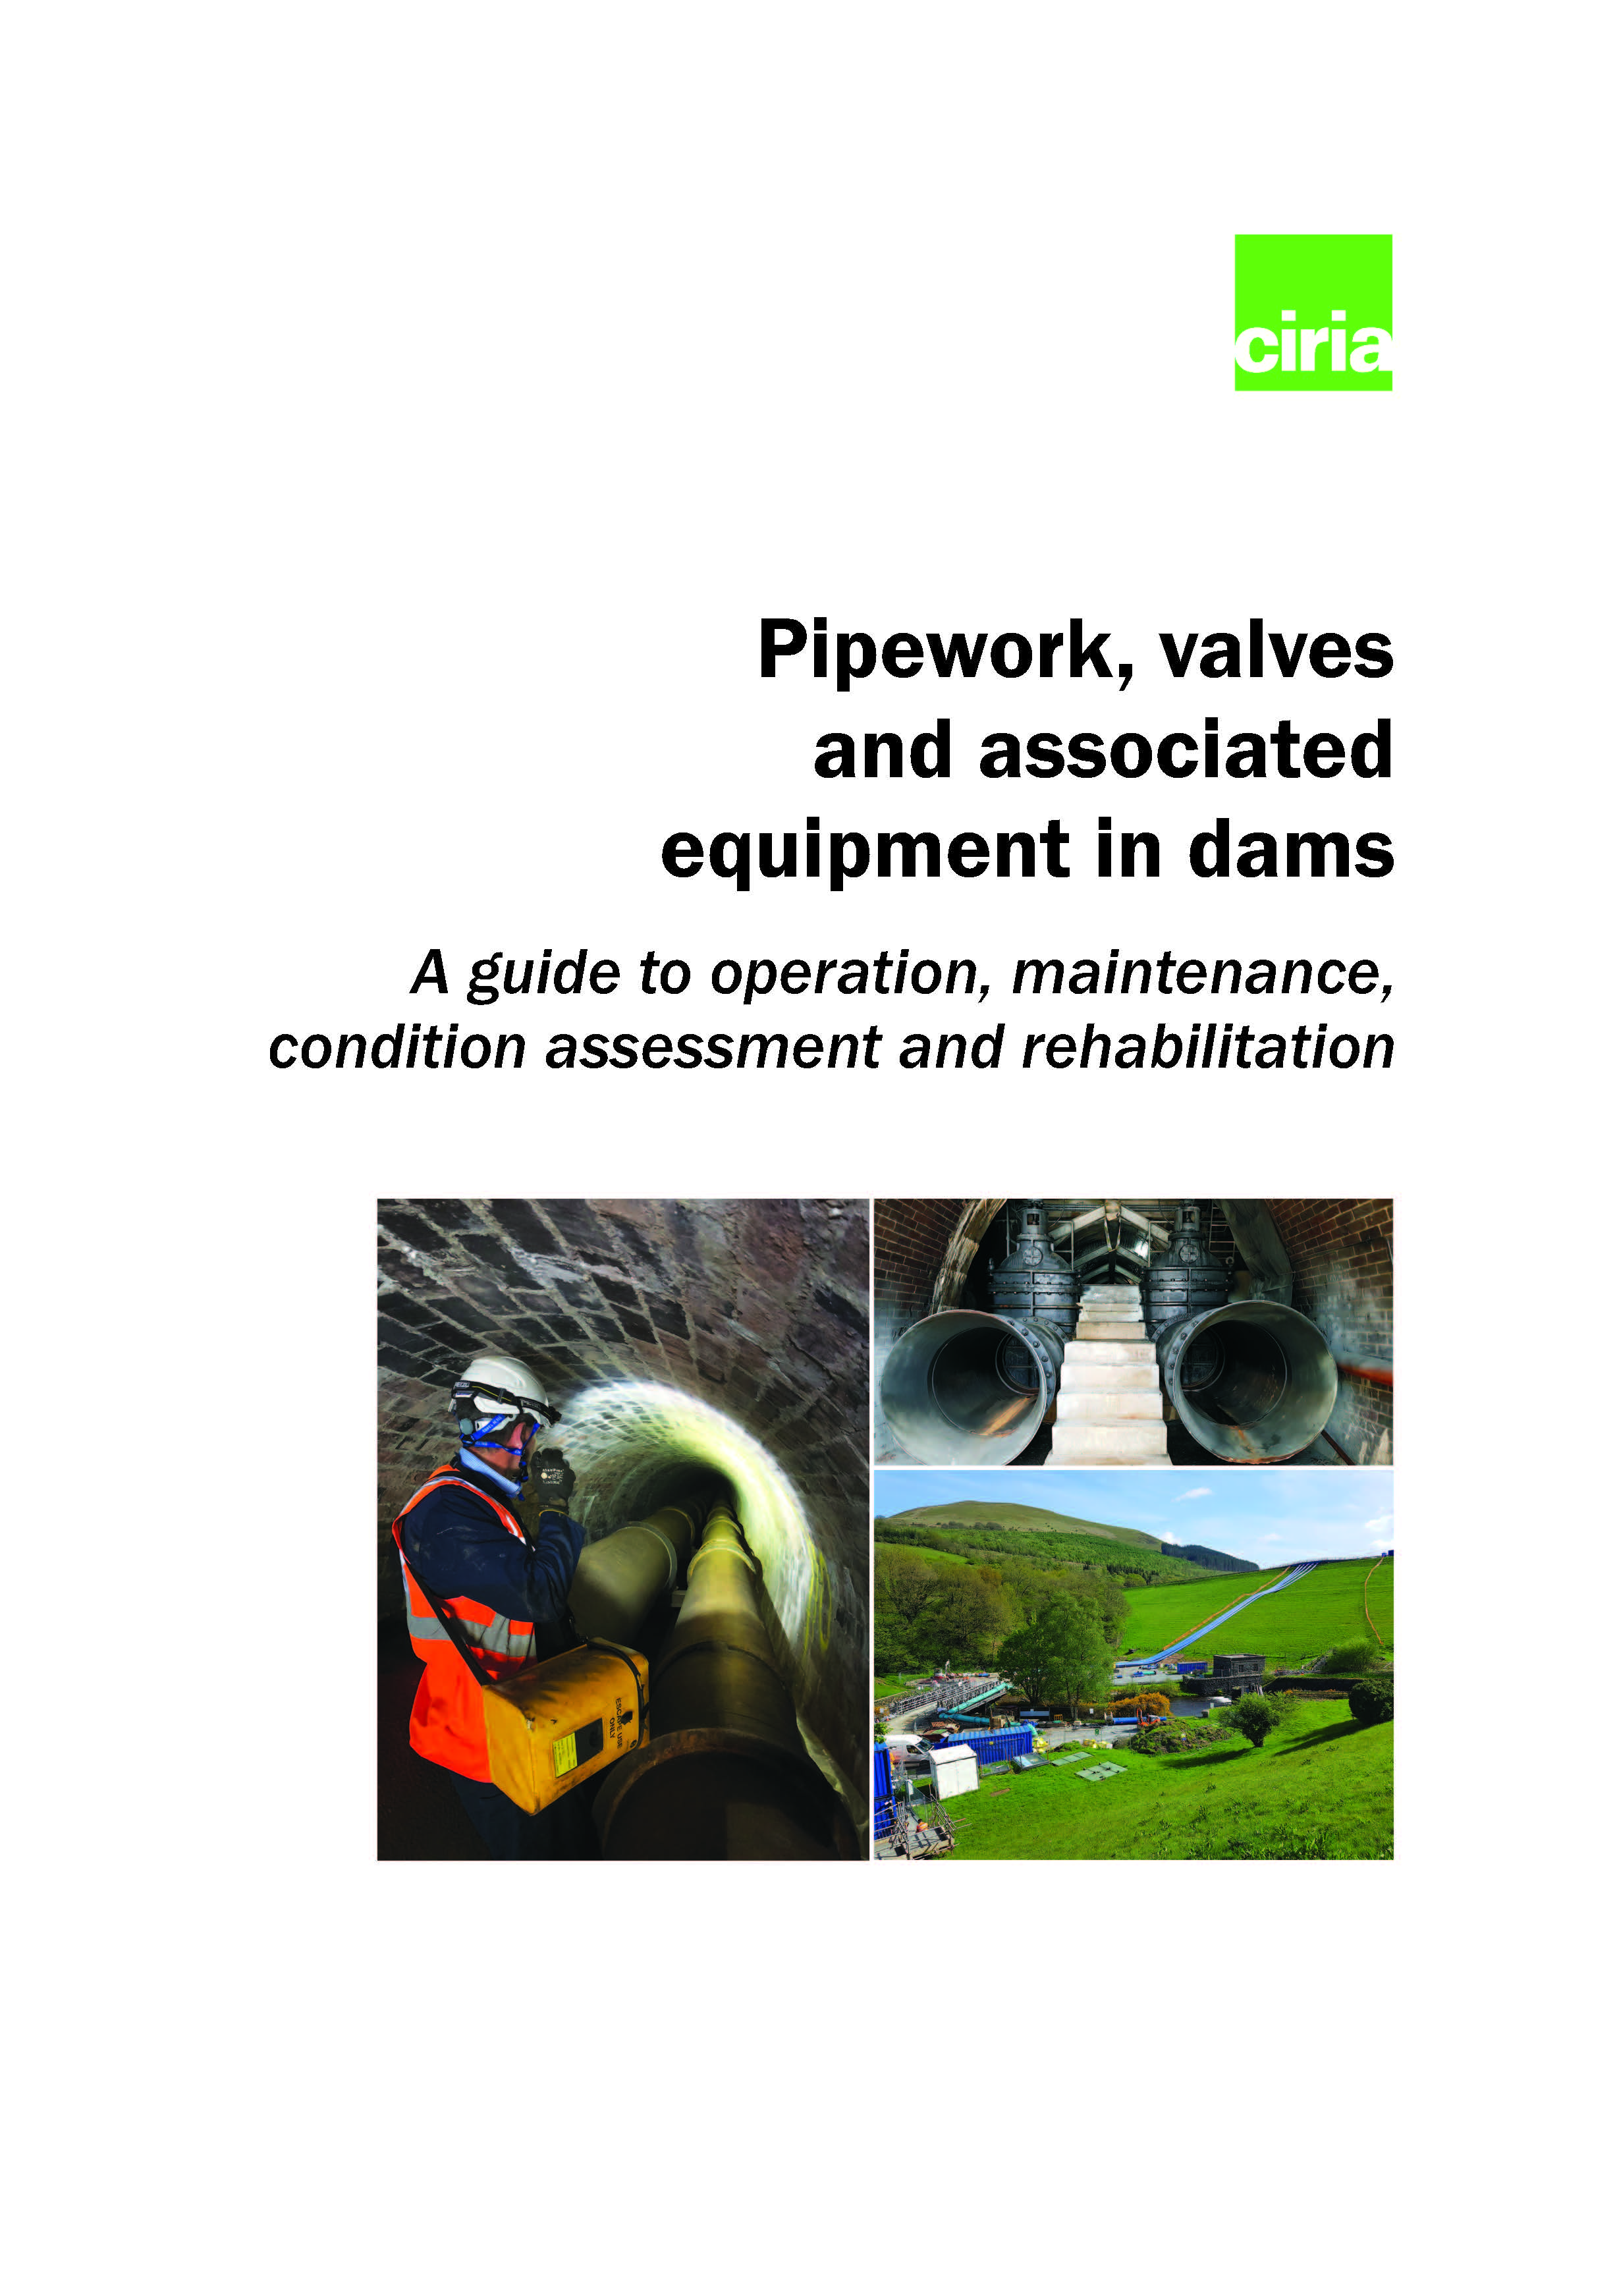 Pipework, valves and associated equipment in dams